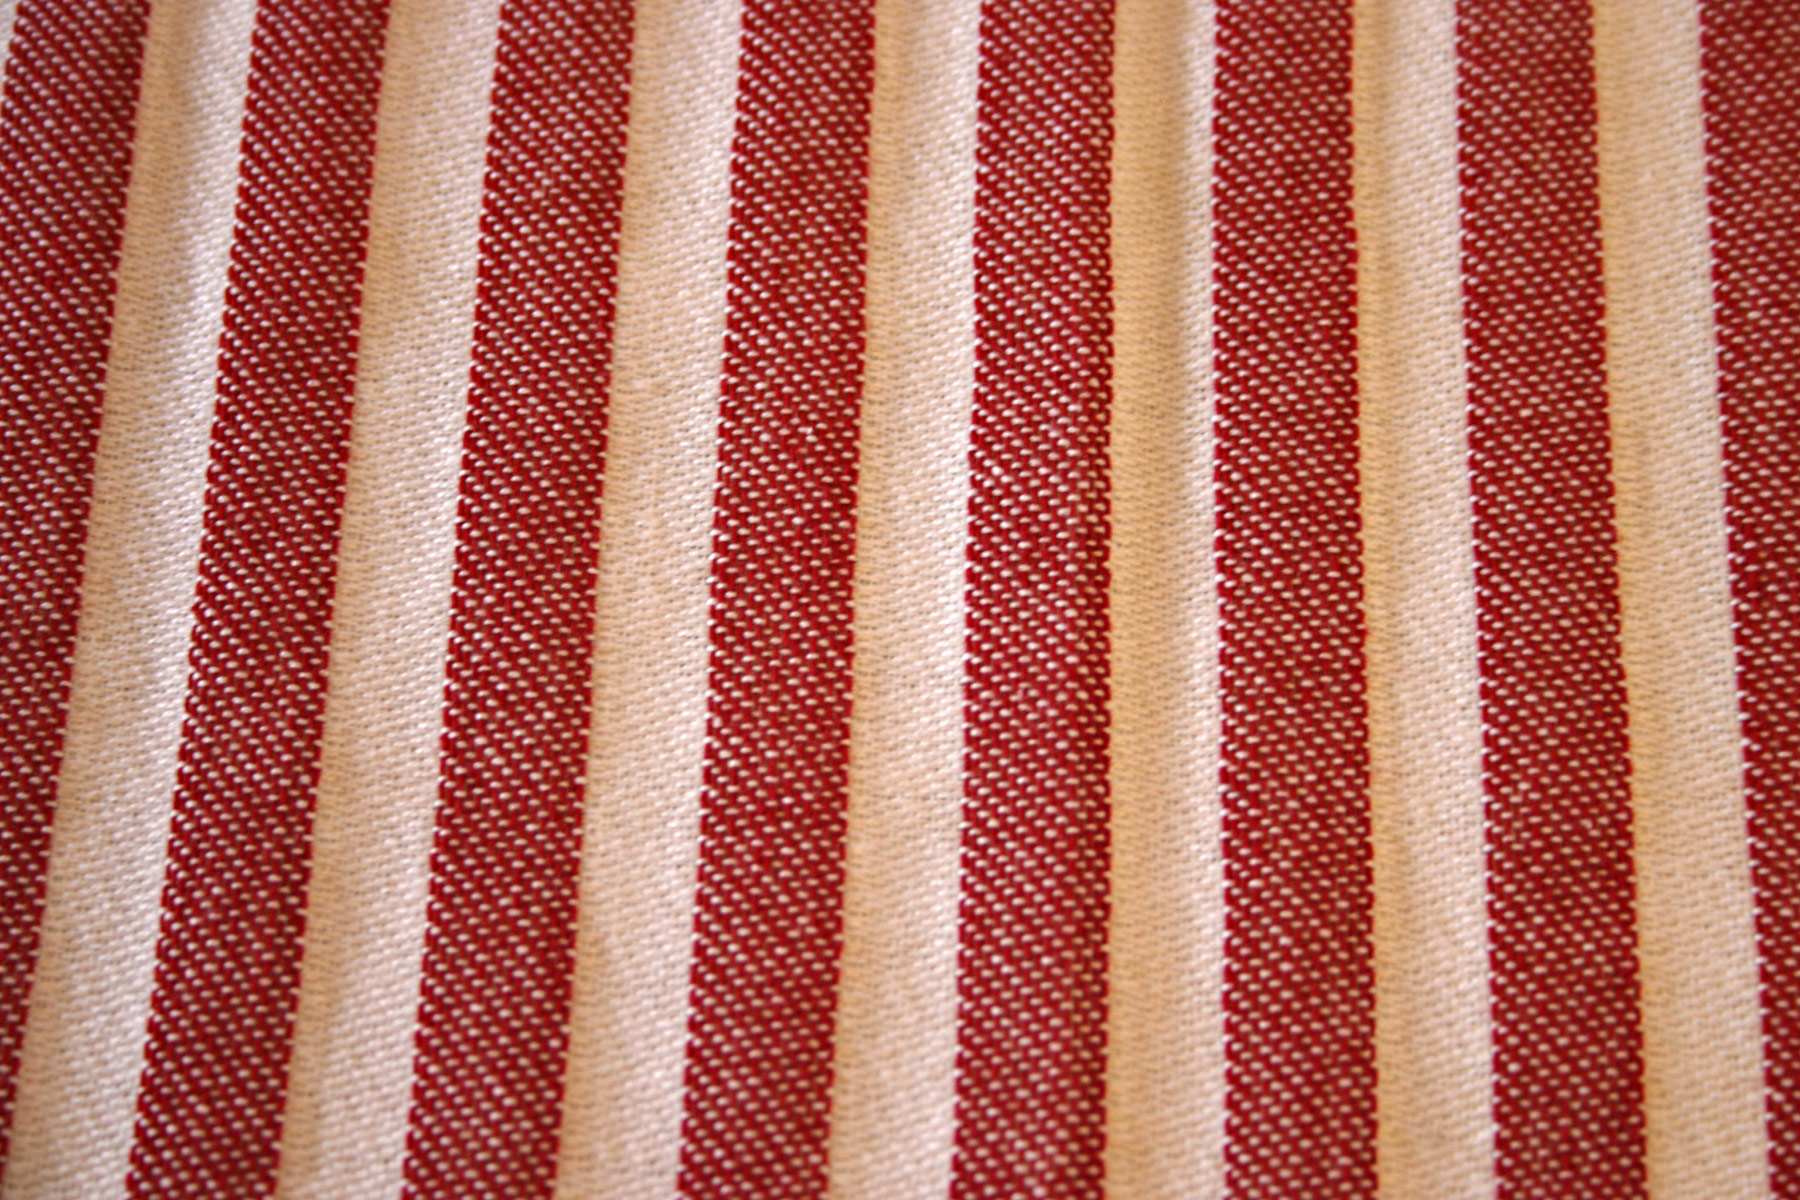 Red and white cloth photo